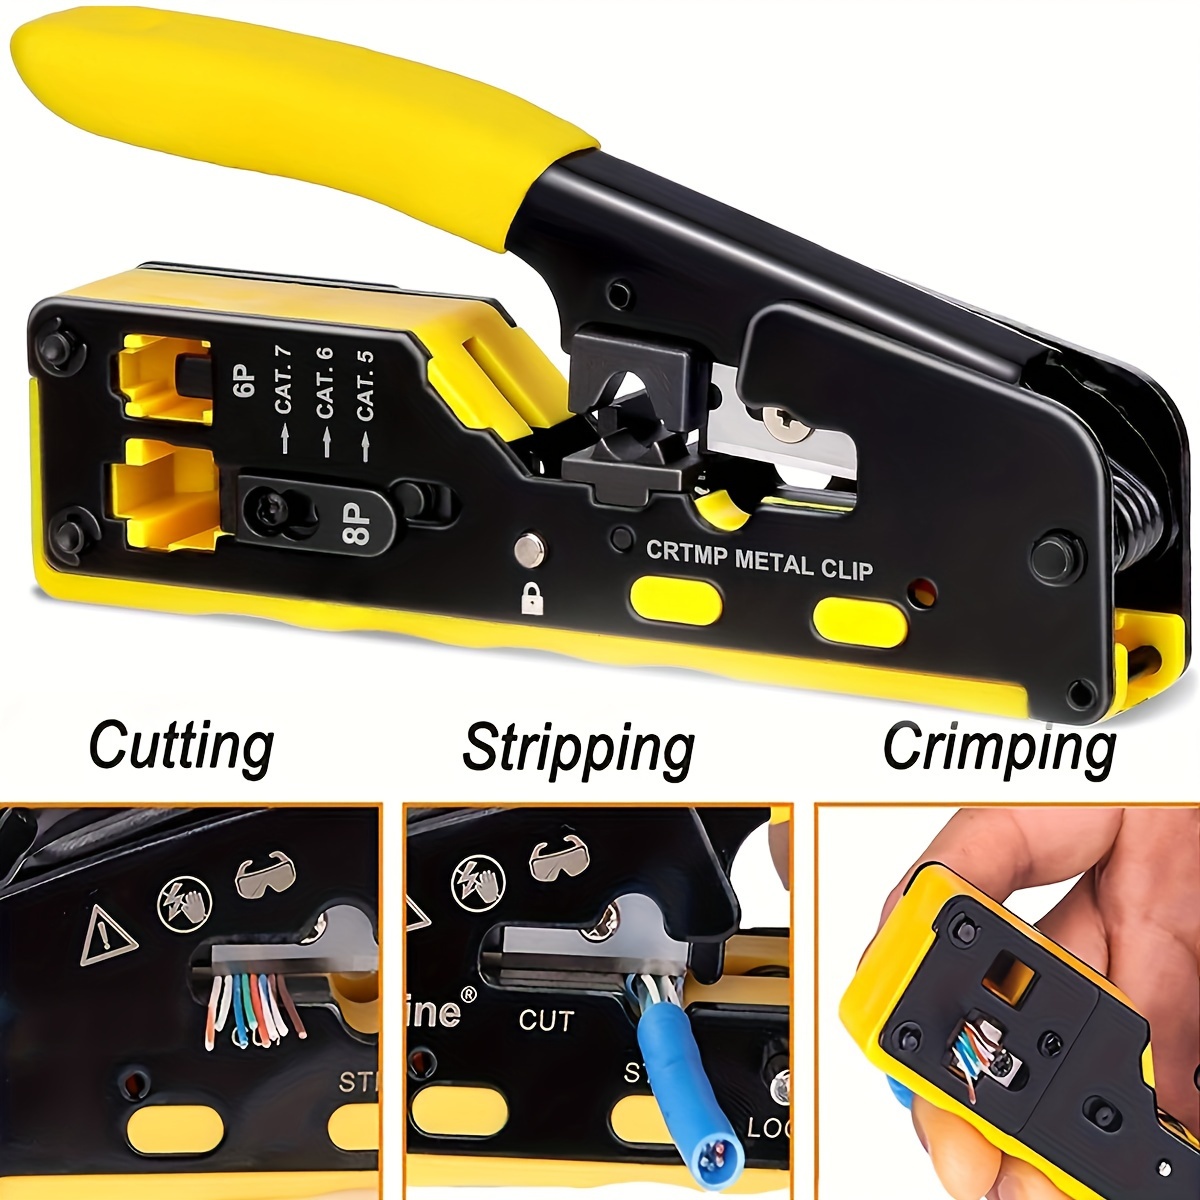 

1pc Pass Through Rj45 Crimp Tool Kit All-in-one Ethernet Crimper Cat7 Cat6 Cat5 Crimping Tool With Network Cable Tester, Cat6 Rj45 Pass Through Connector, Connector Boots